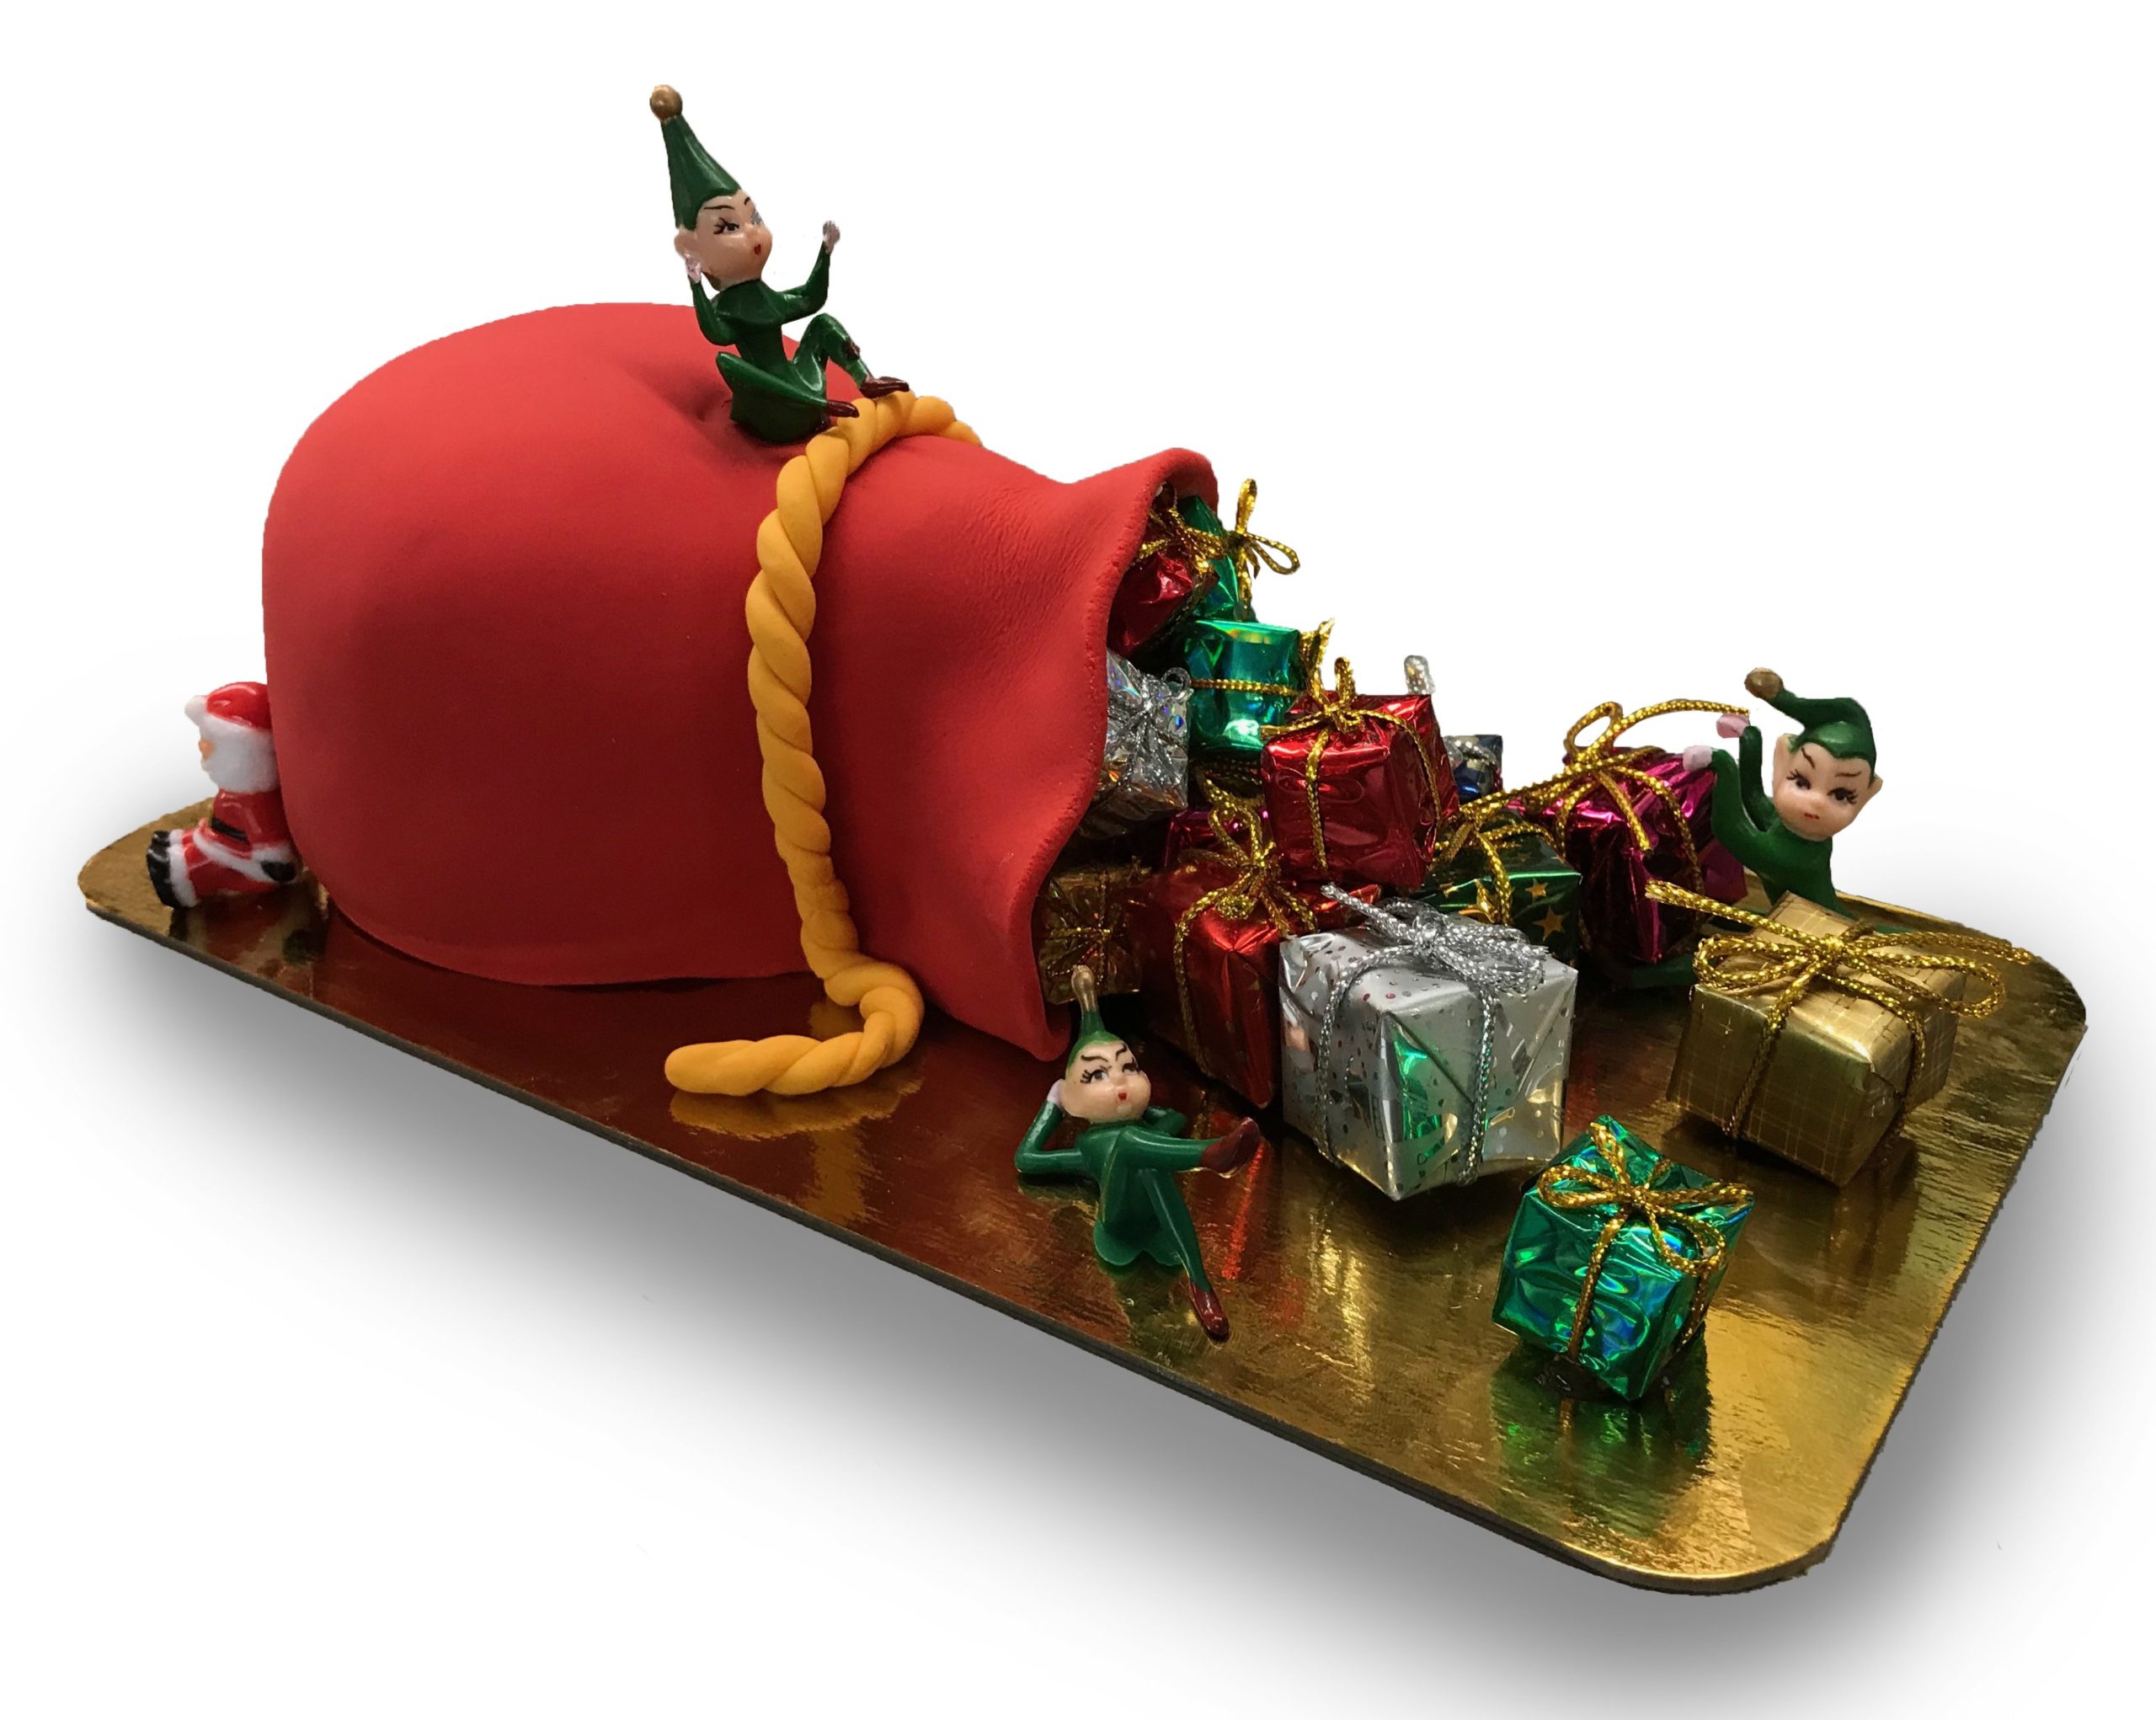 Fondant covered santa's sack shaped cake with toy presents and elves